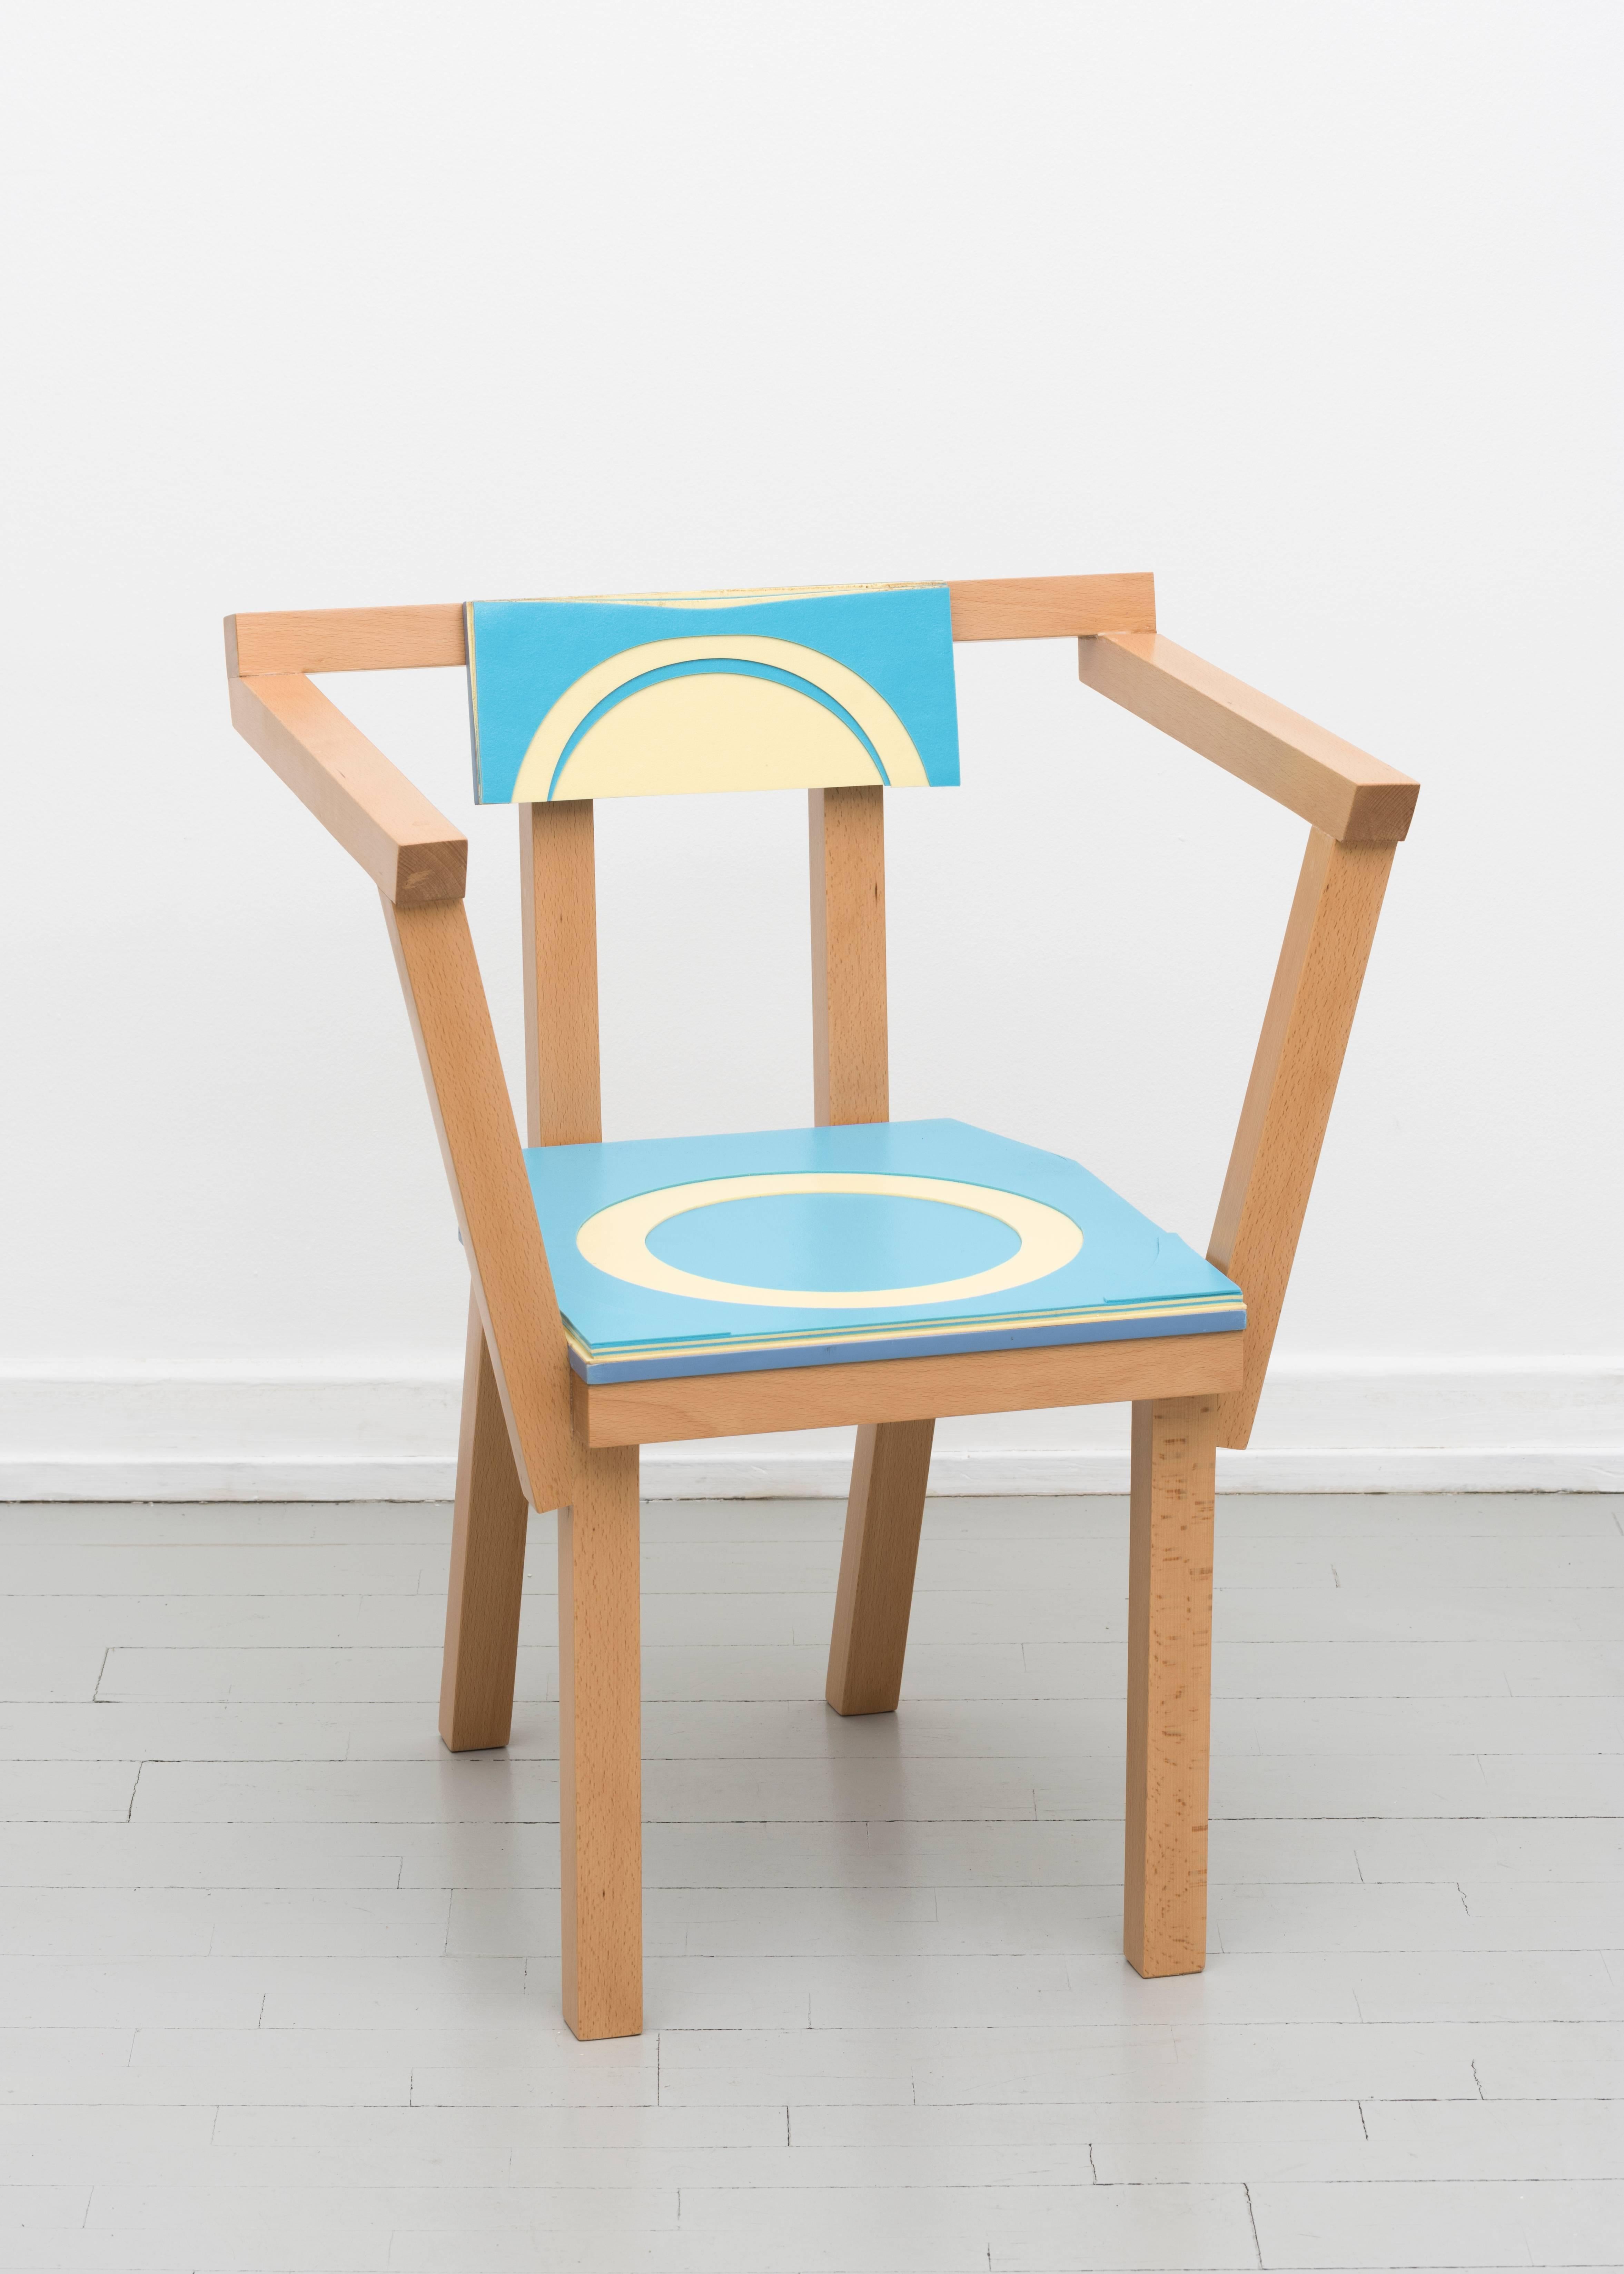 Takkapplie Chair by Clemence Seilles from the exhibition 